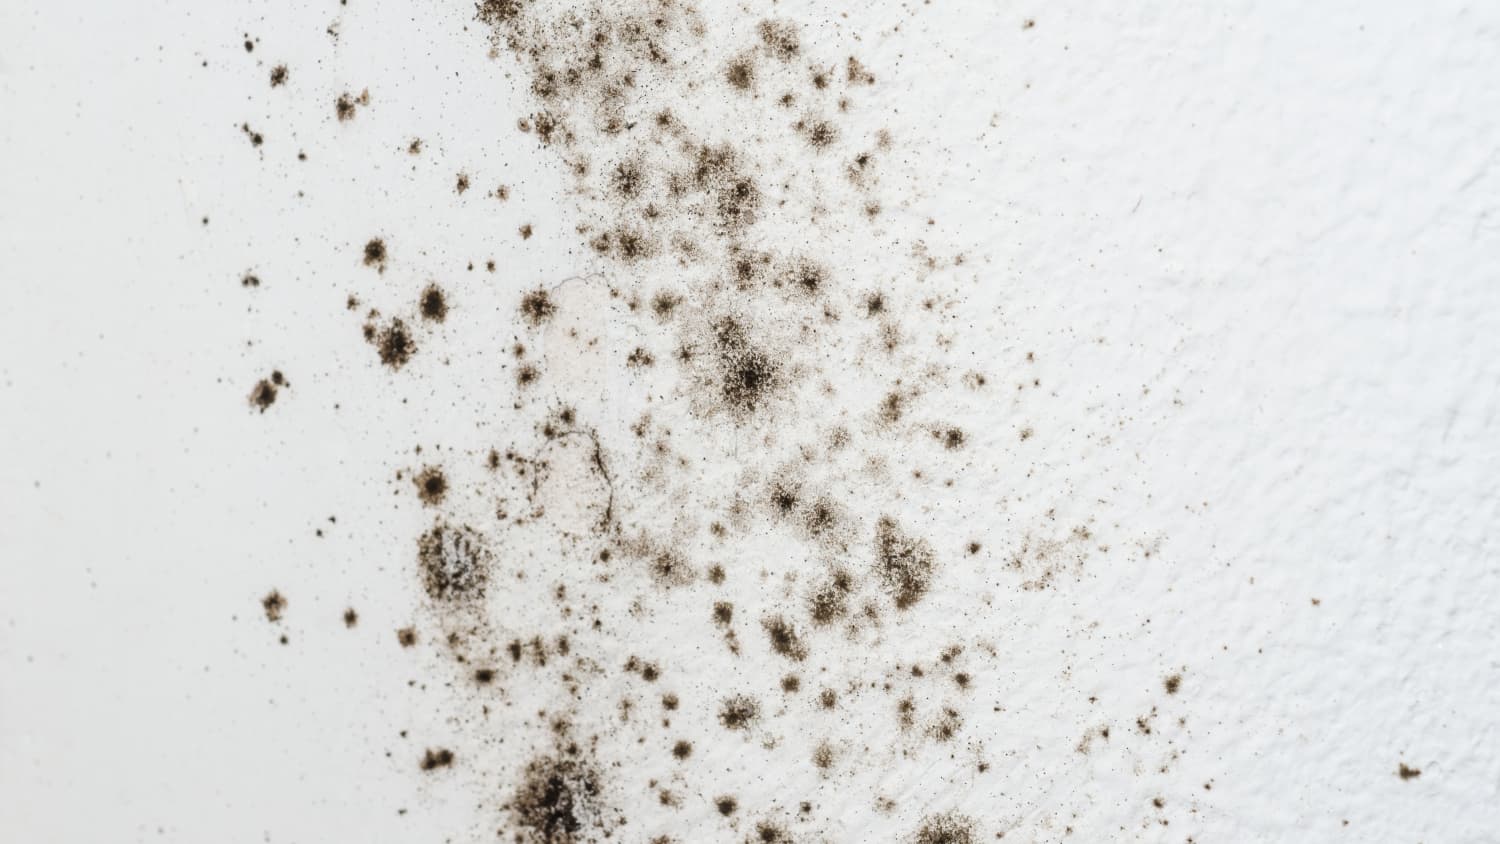 Black Mold Symptoms - How To Get Rid Of Black Mold  Apartment Therapy